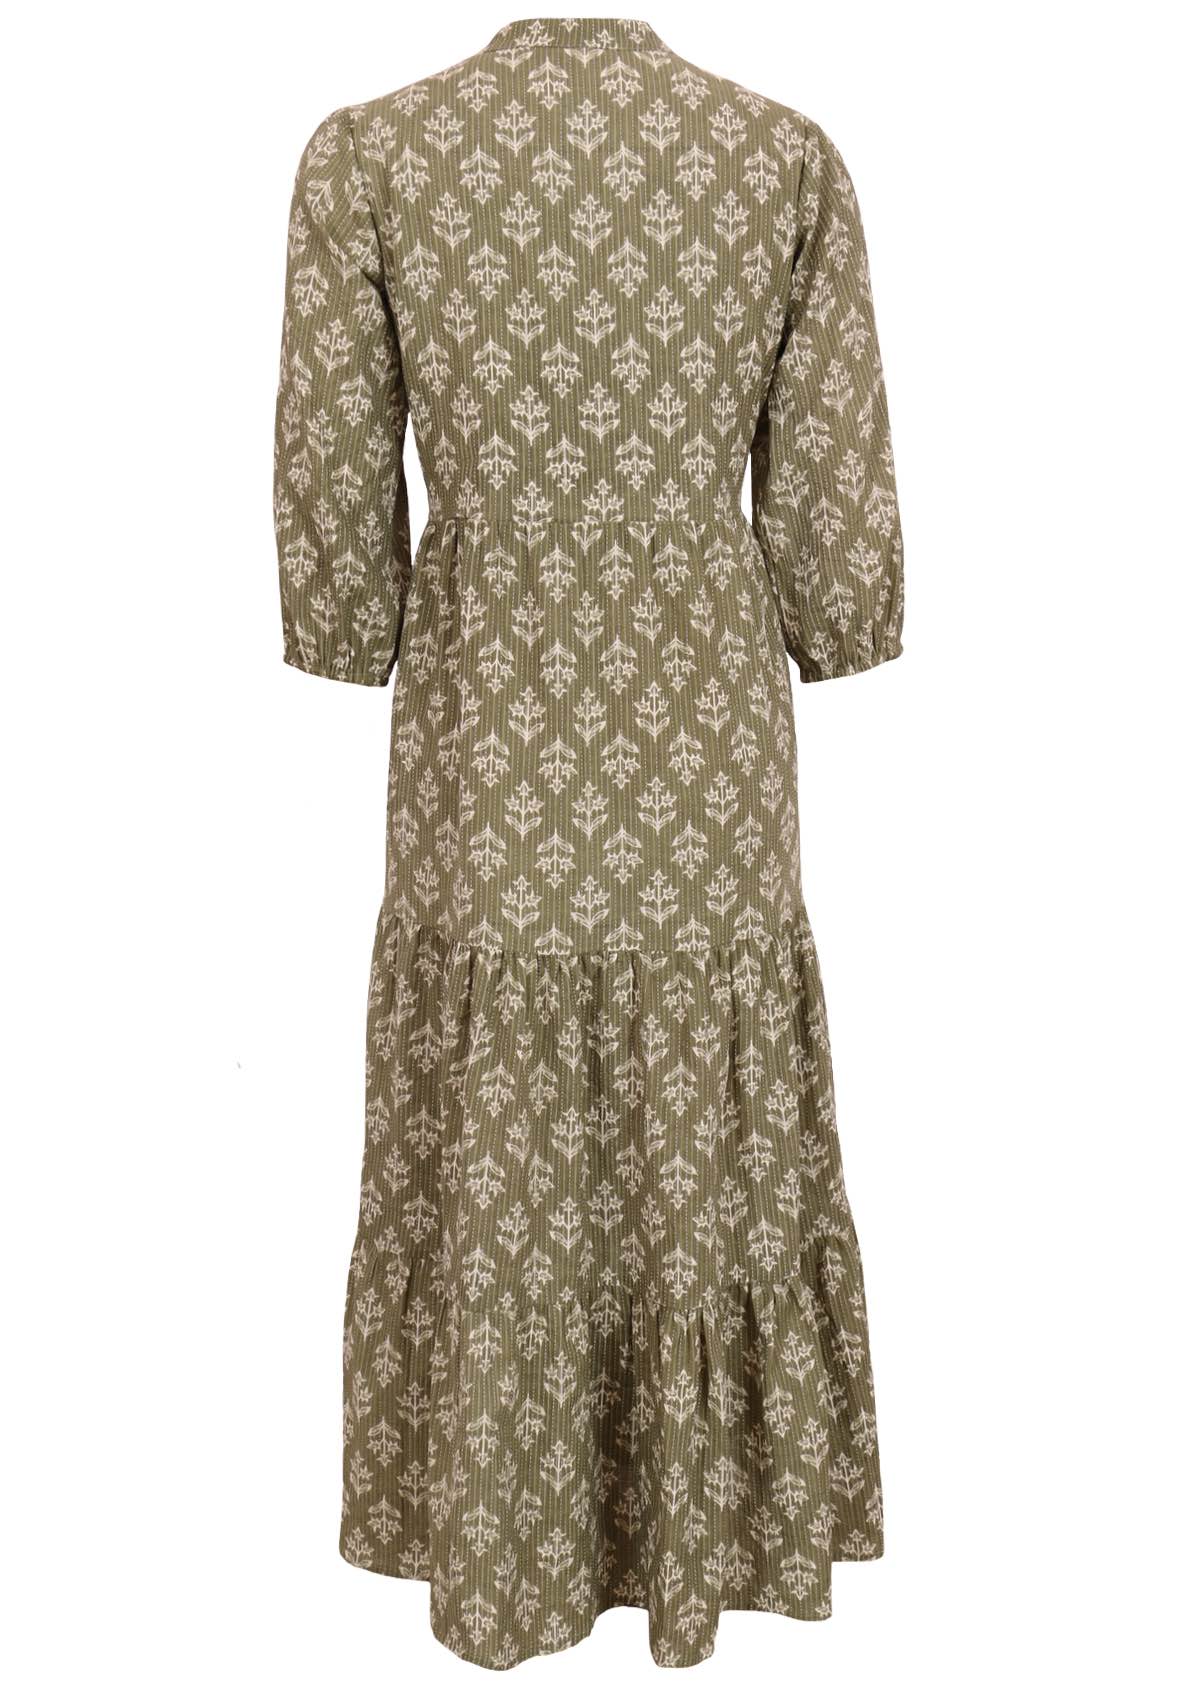 Cotton maxi dress in green with flowers and kantha stitches